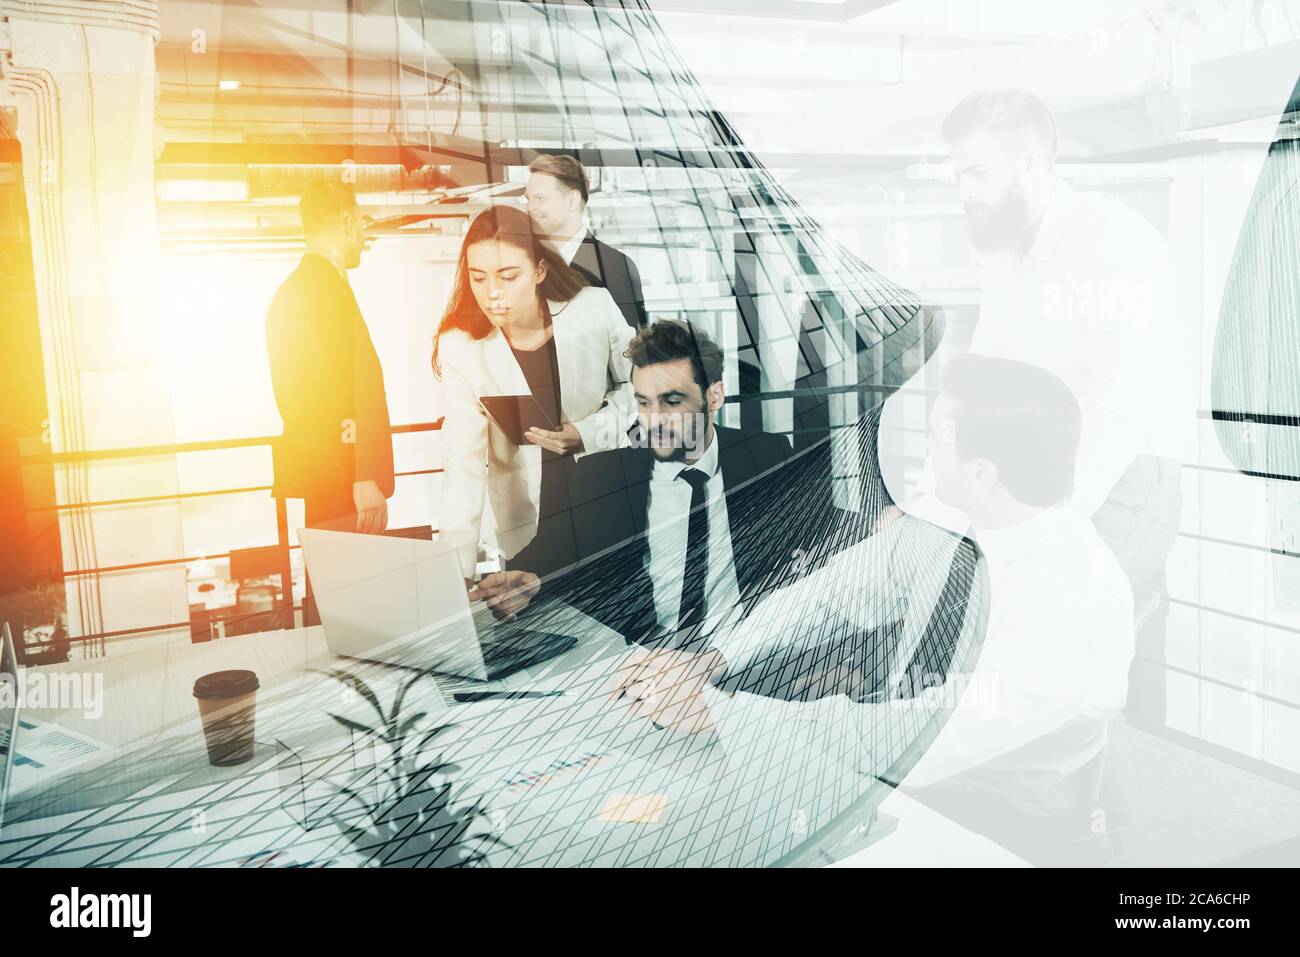 Concept background with business people working in a modern office. Double exposure Stock Photo